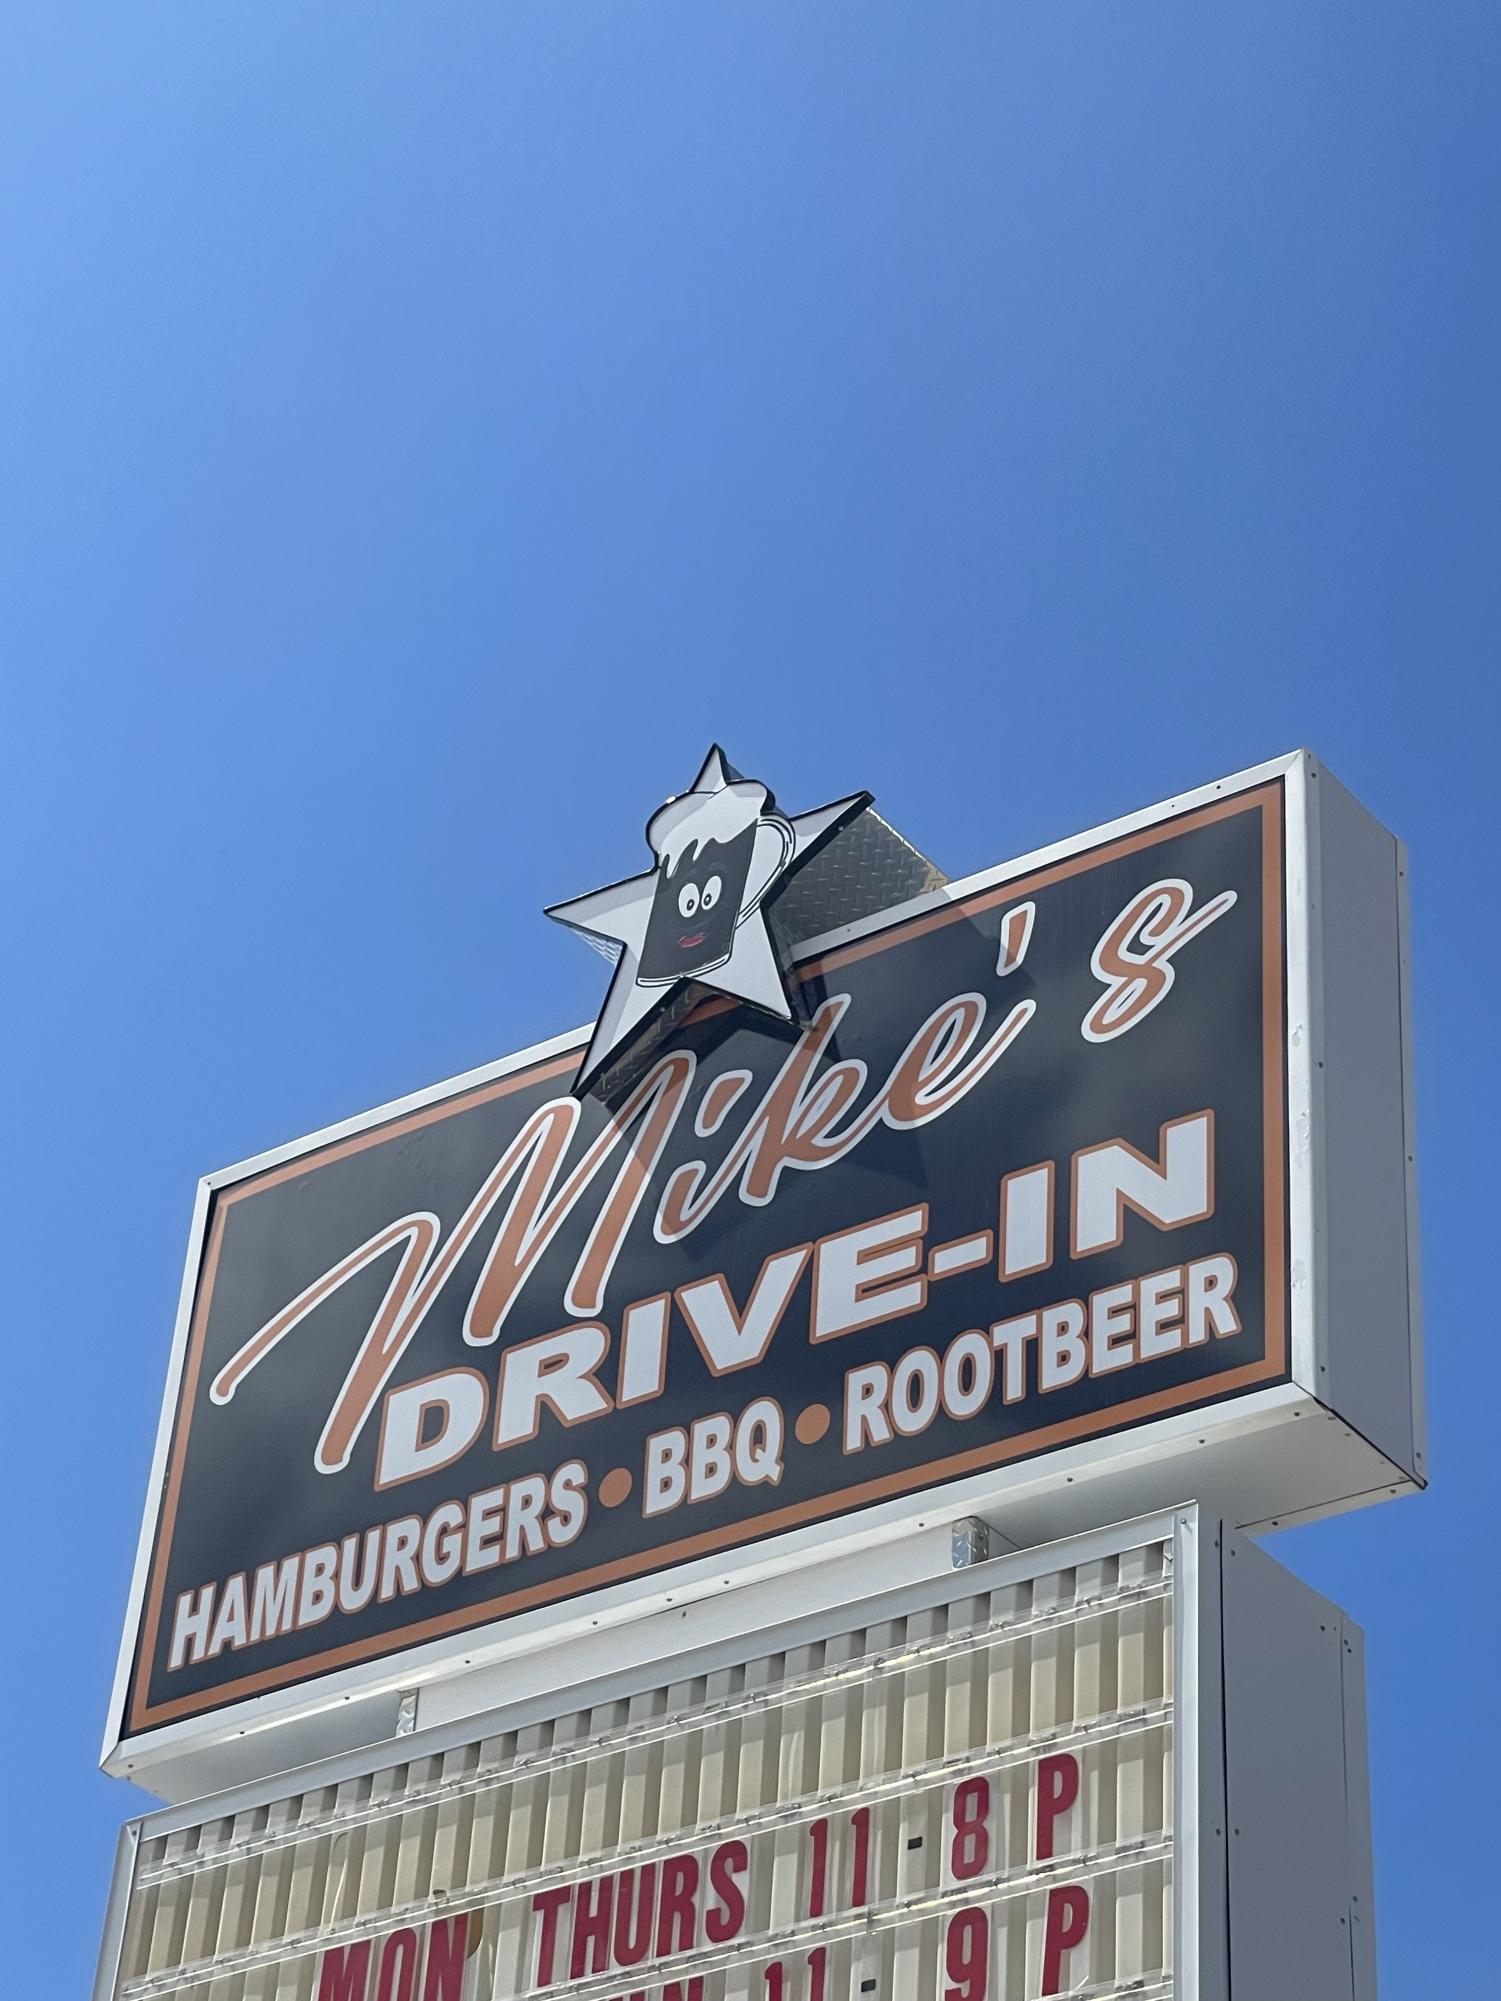 The retro-looking sign of Mikes Drive-In towers over the establishment.